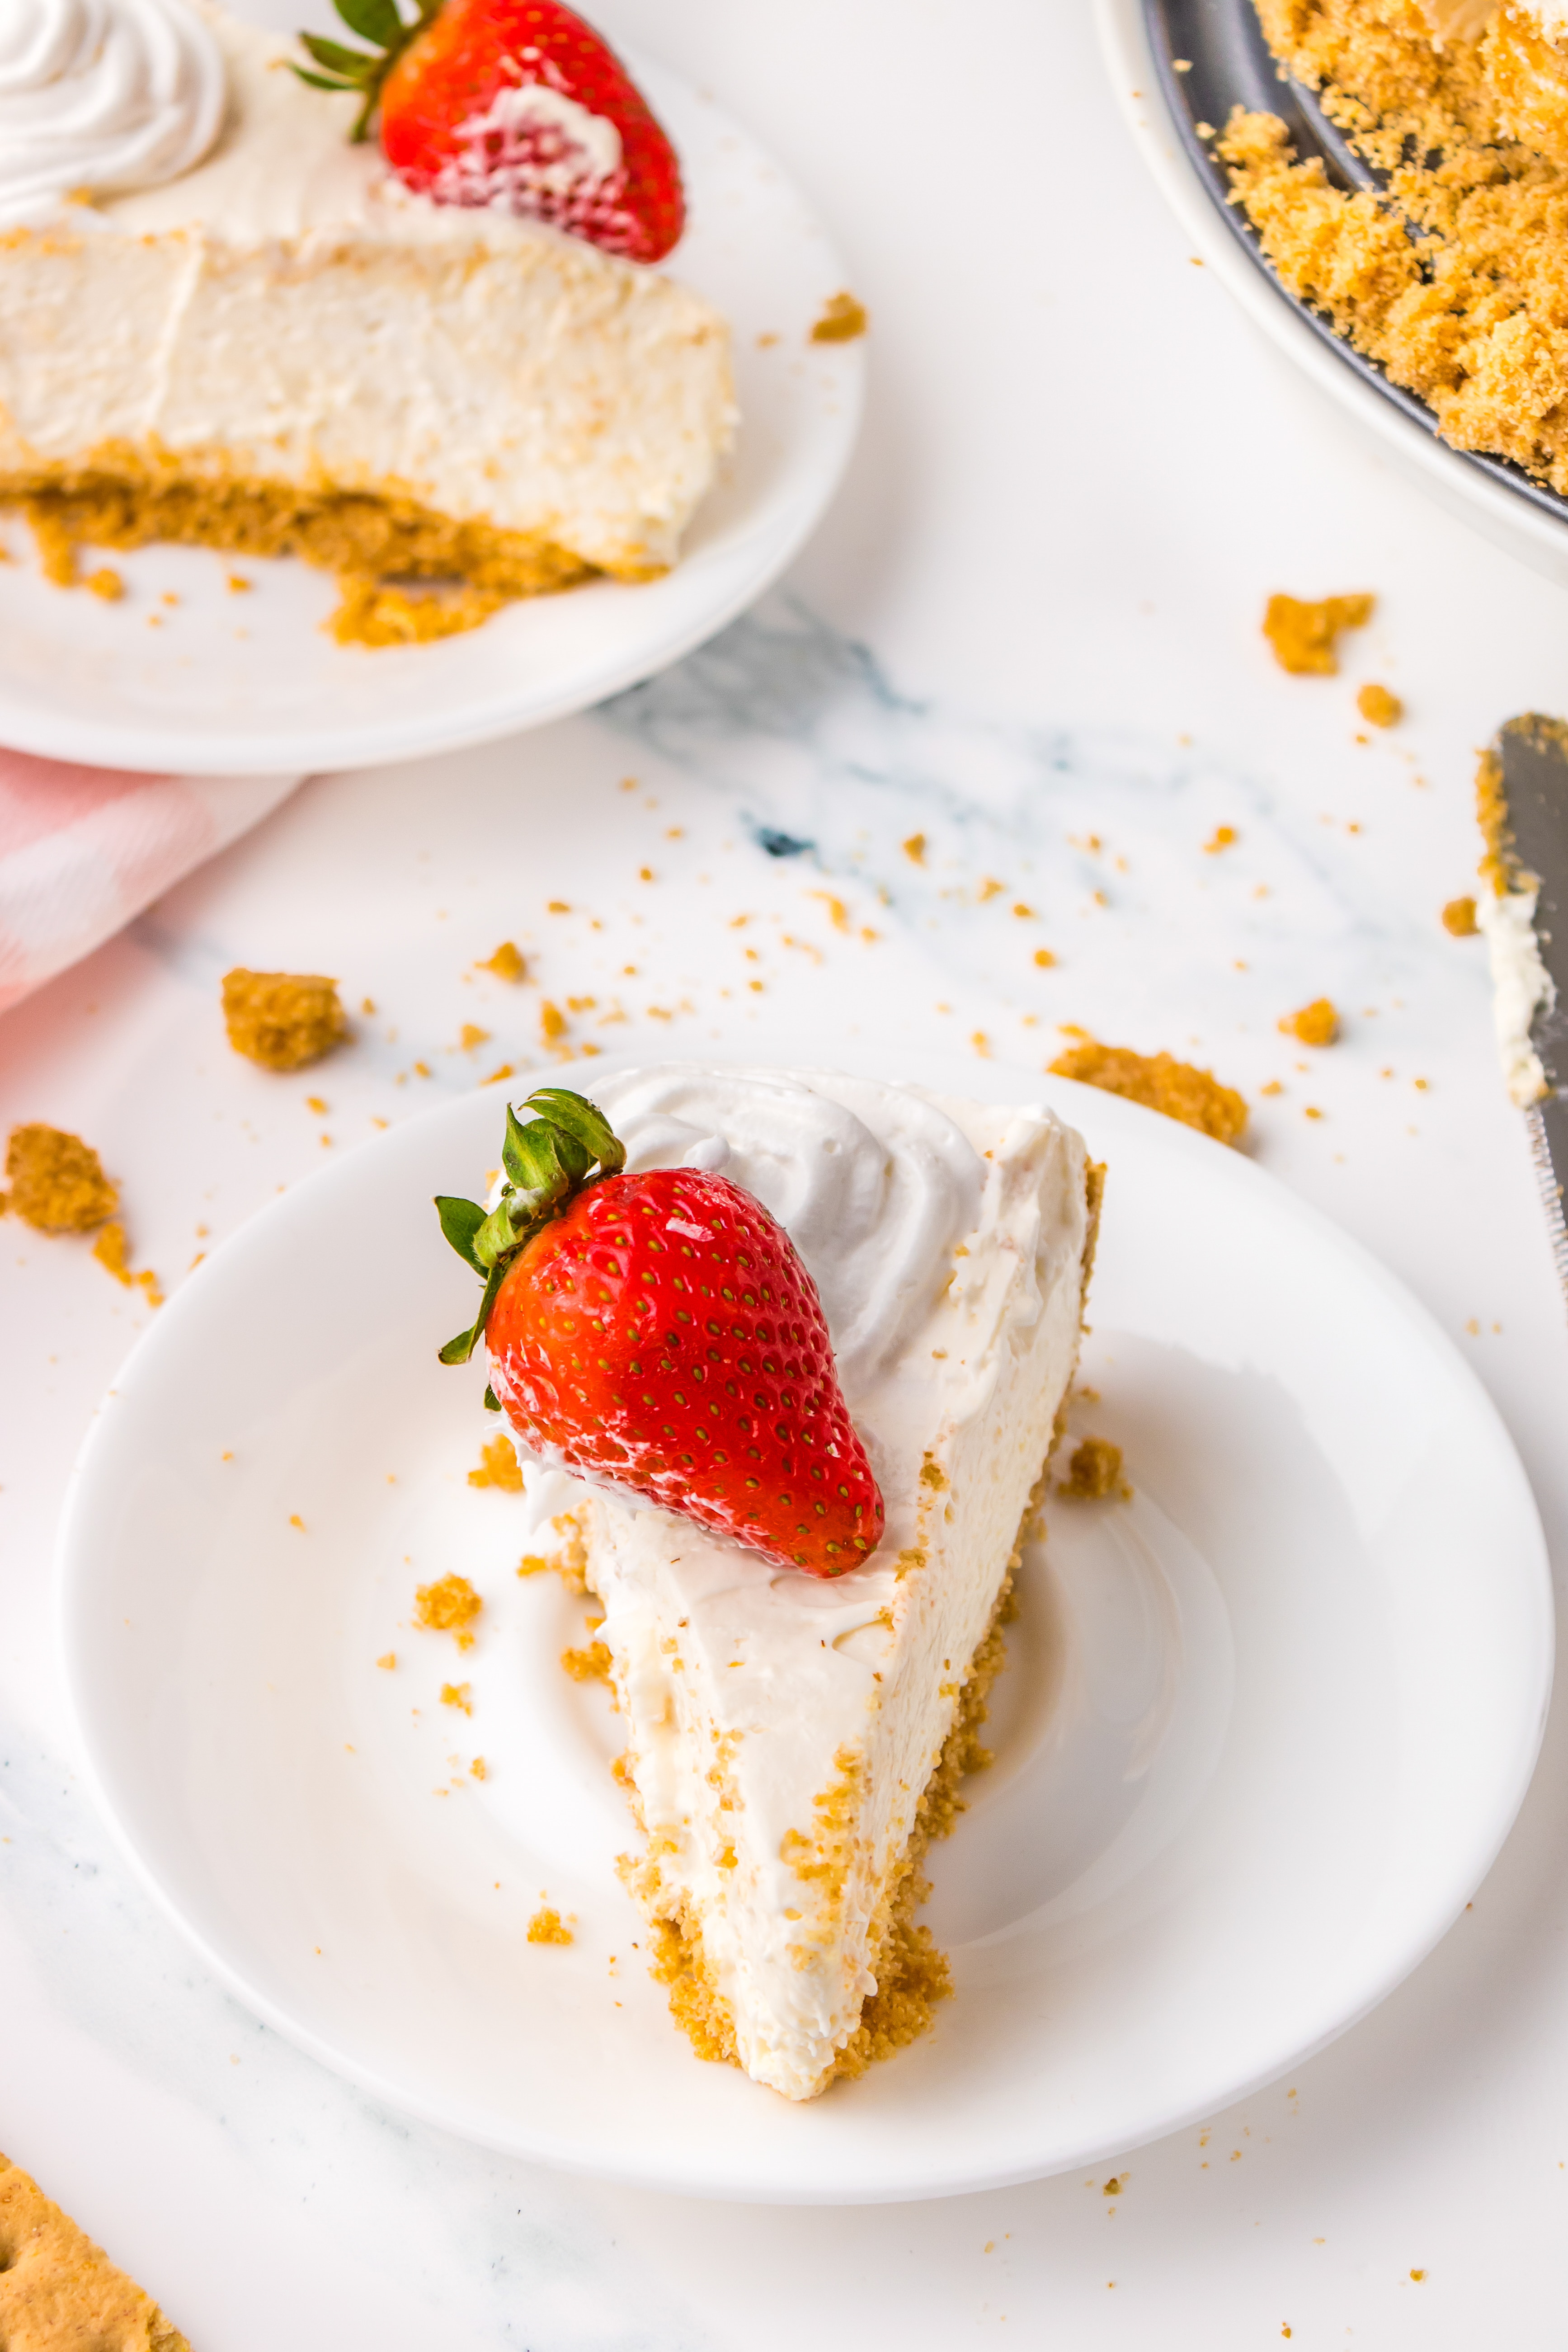 A slice of No Bake Cheesecake topped with a fresh strawberry on a white dessert plate.